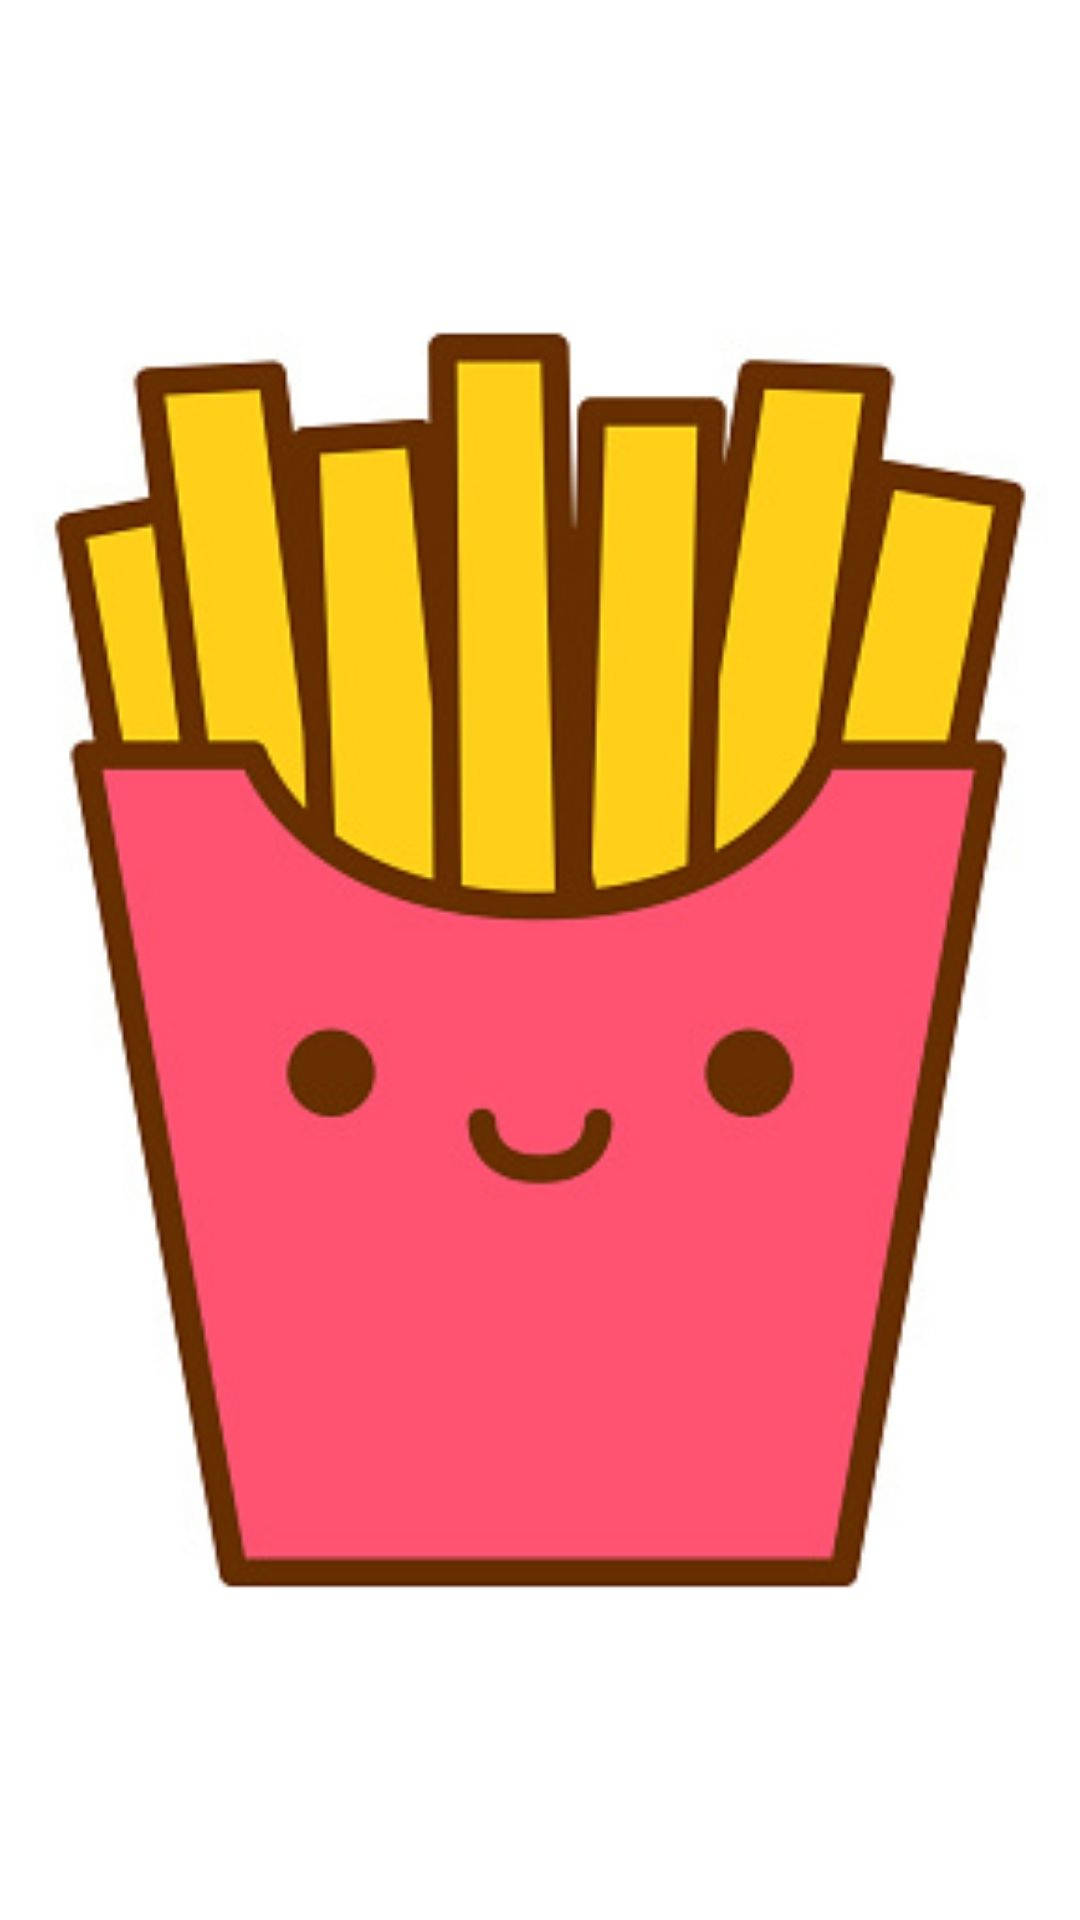 Playful Pink French Fries - Add A Pop Of Color To Your Snack Time!